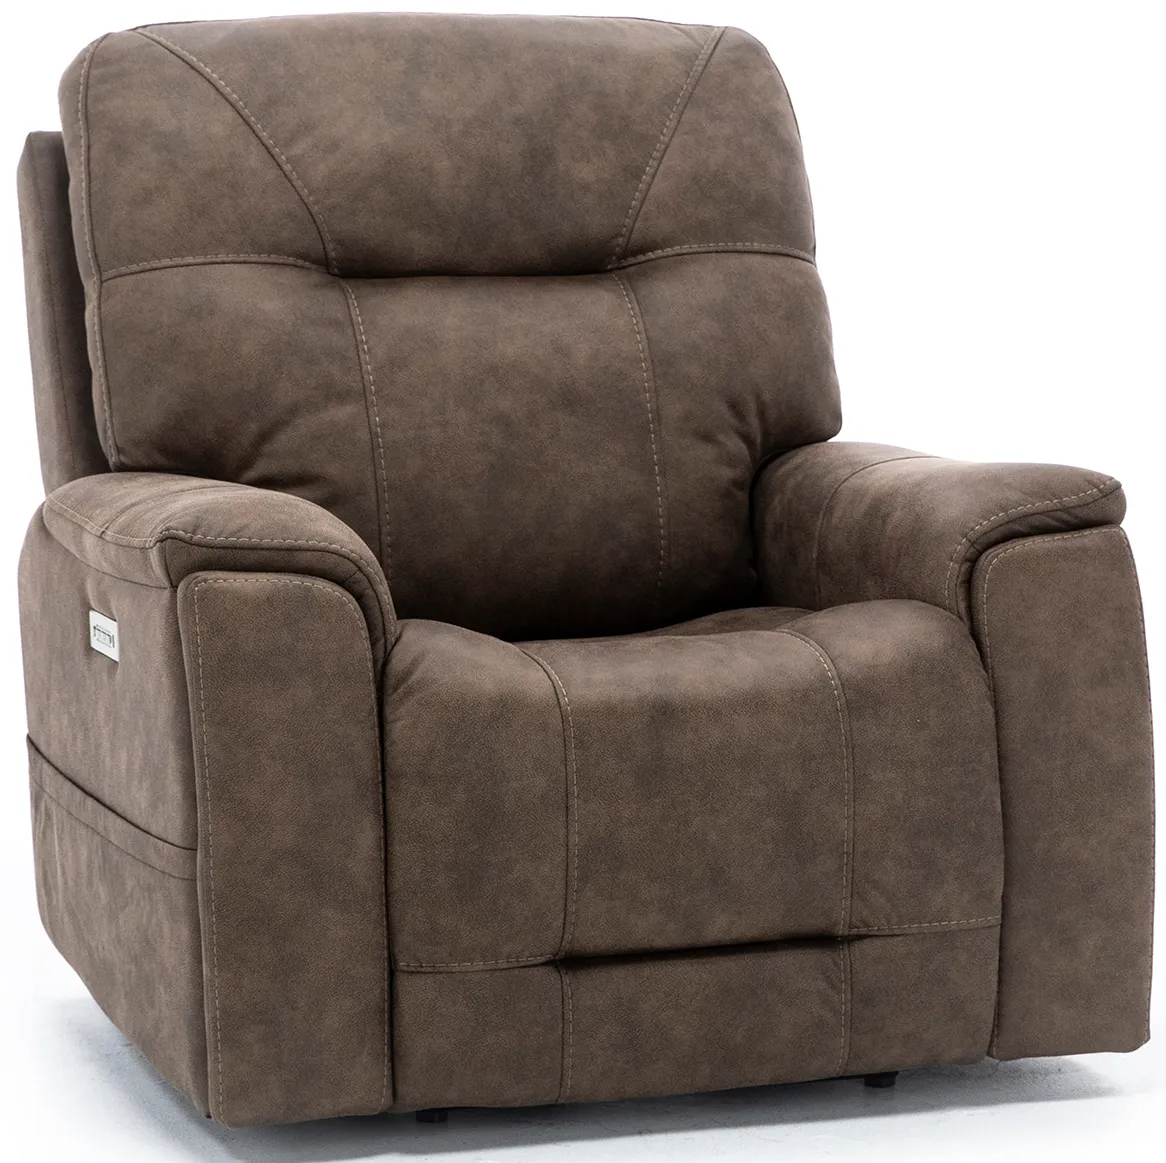 Matthew Fully Loaded Recliner With Hidden Cupholders in Silt